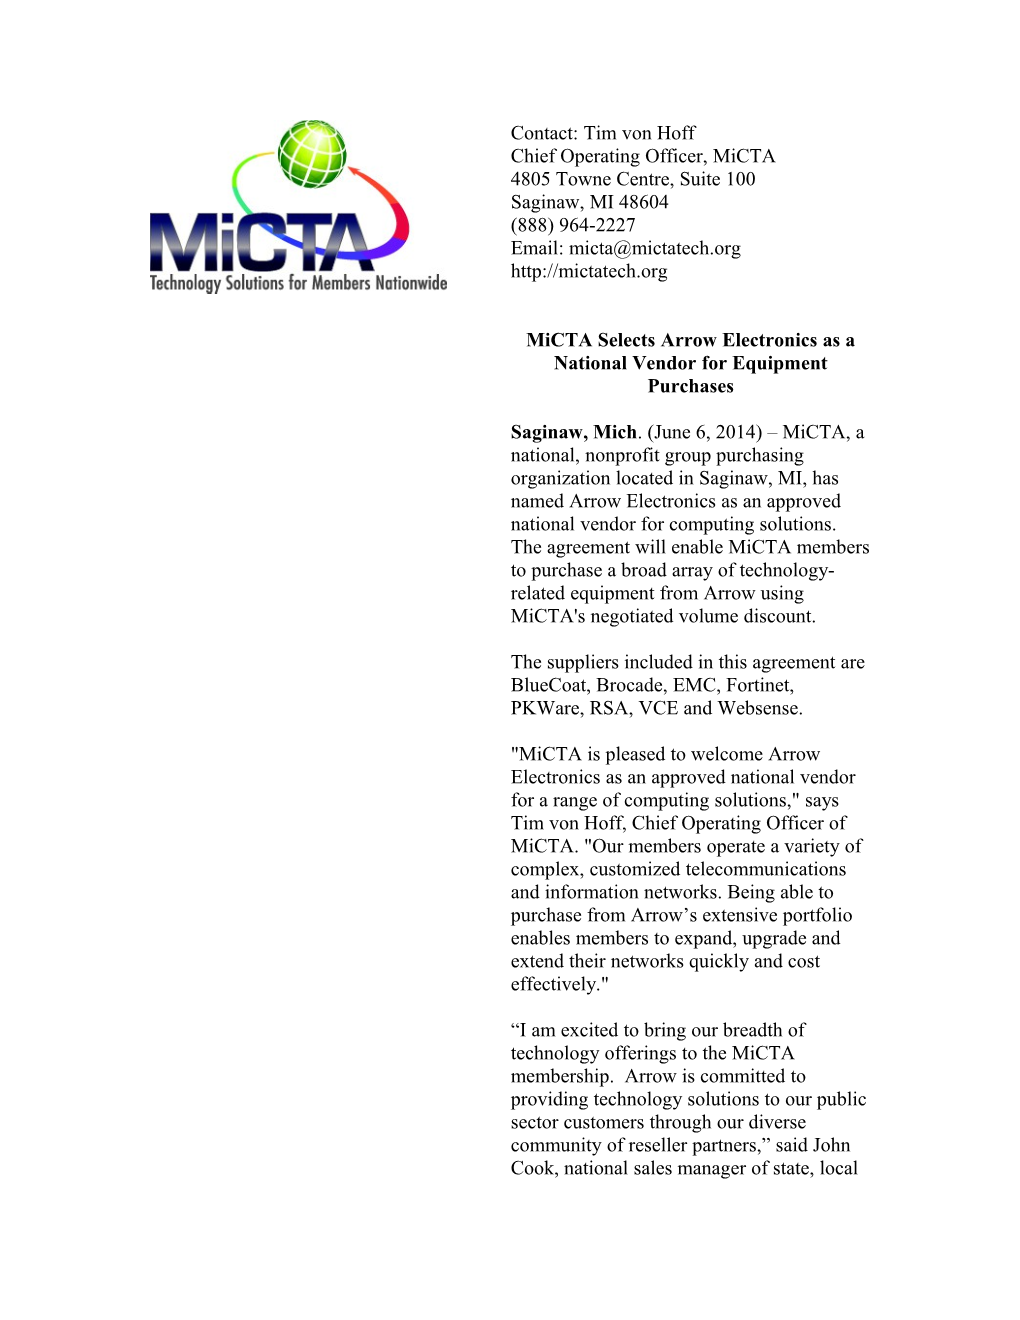 Micta Selects Arrow Electronics As a National Vendor for Equipment Purchases